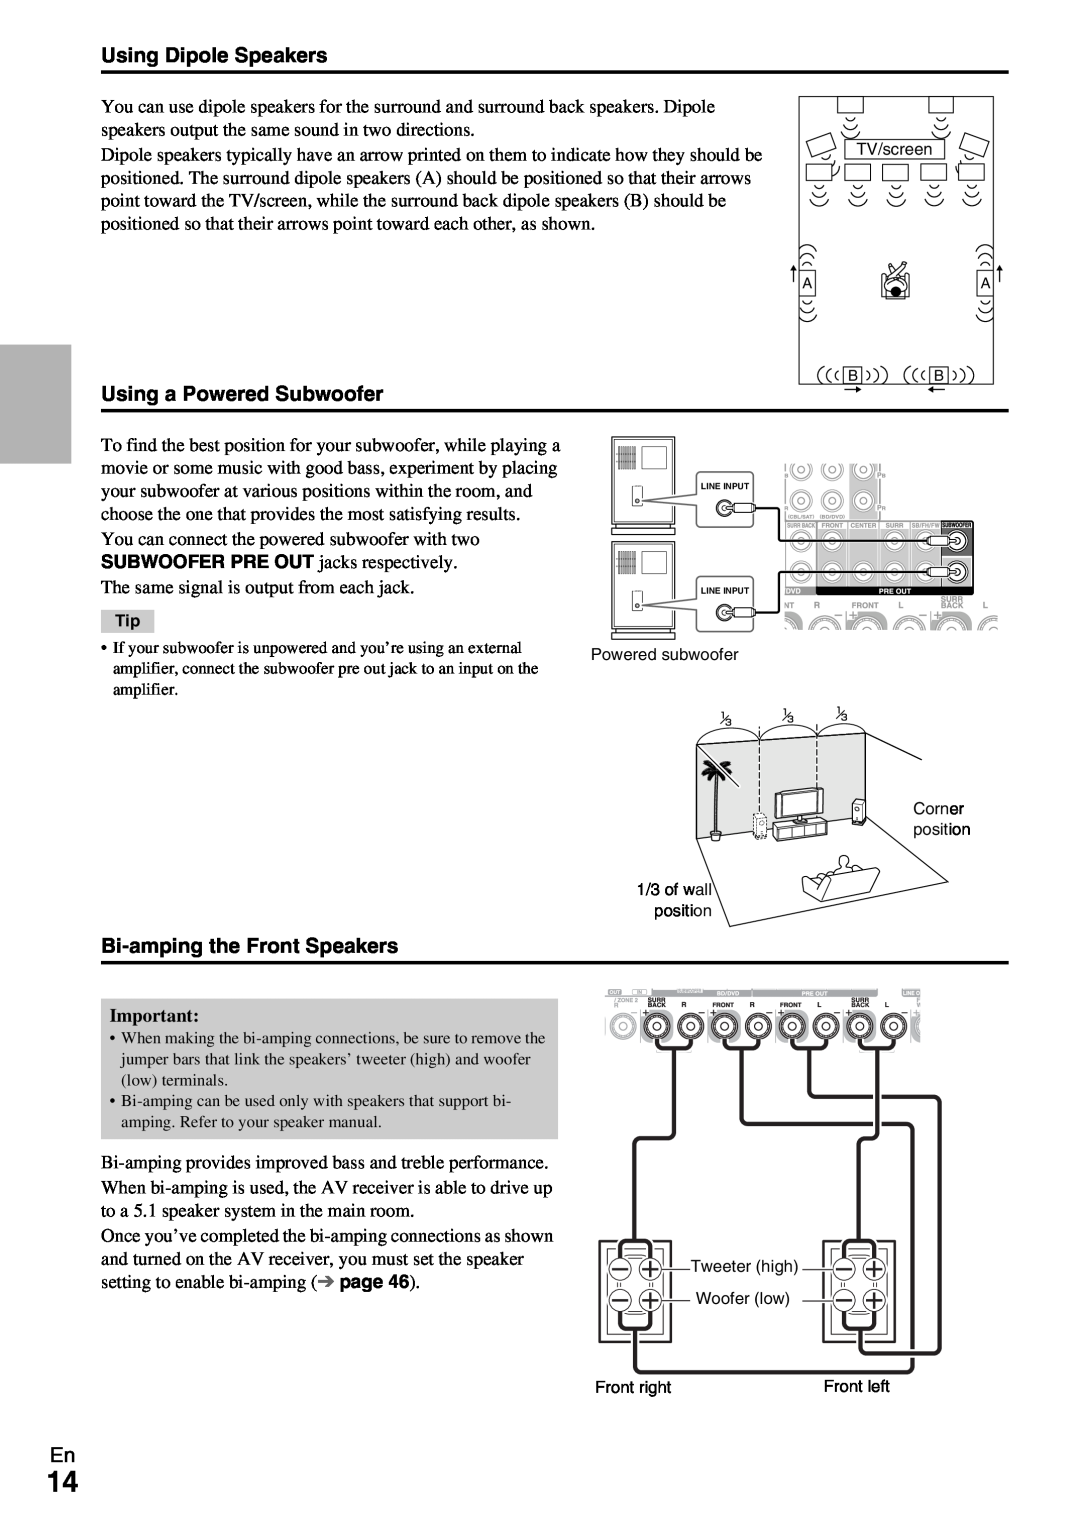 Onkyo HT-RC370 instruction manual Using Dipole Speakers, Using a Powered Subwoofer, Bi-ampingthe Front Speakers 